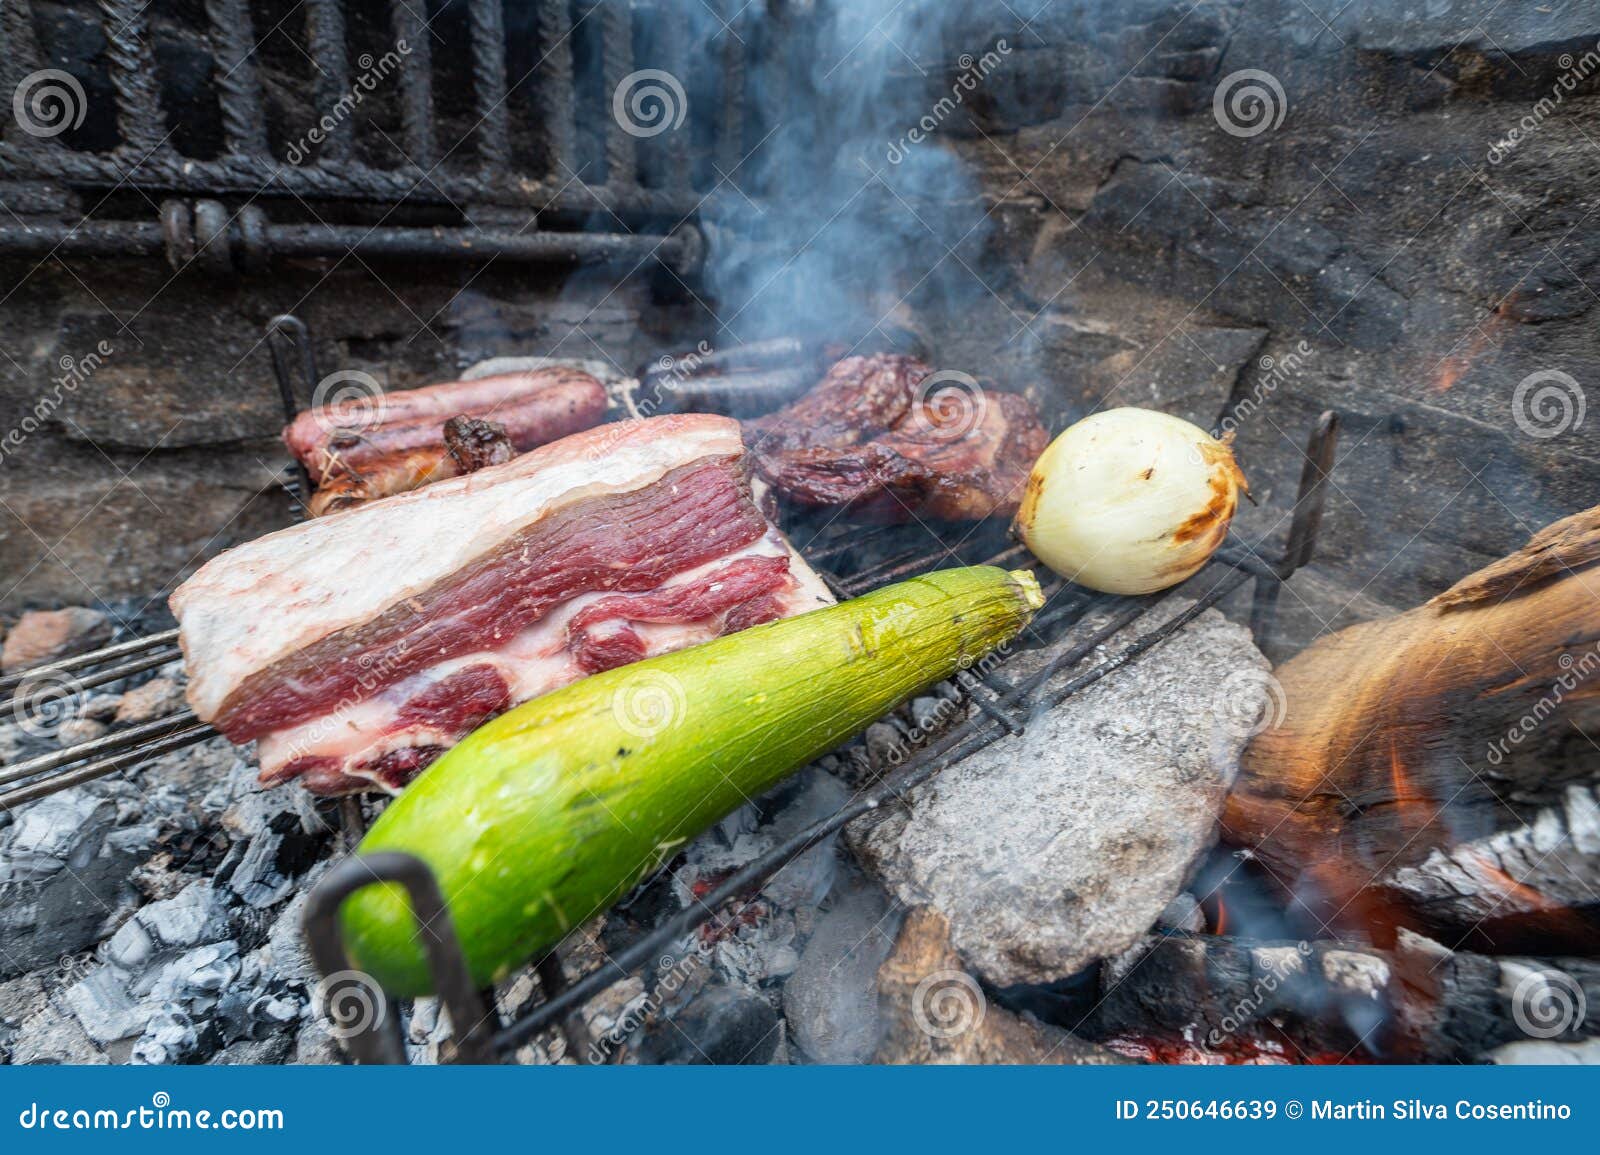 typical uruguayan and argentine asado cooked on fire. entrana and vacio meat cuts. accompanied with chorizo